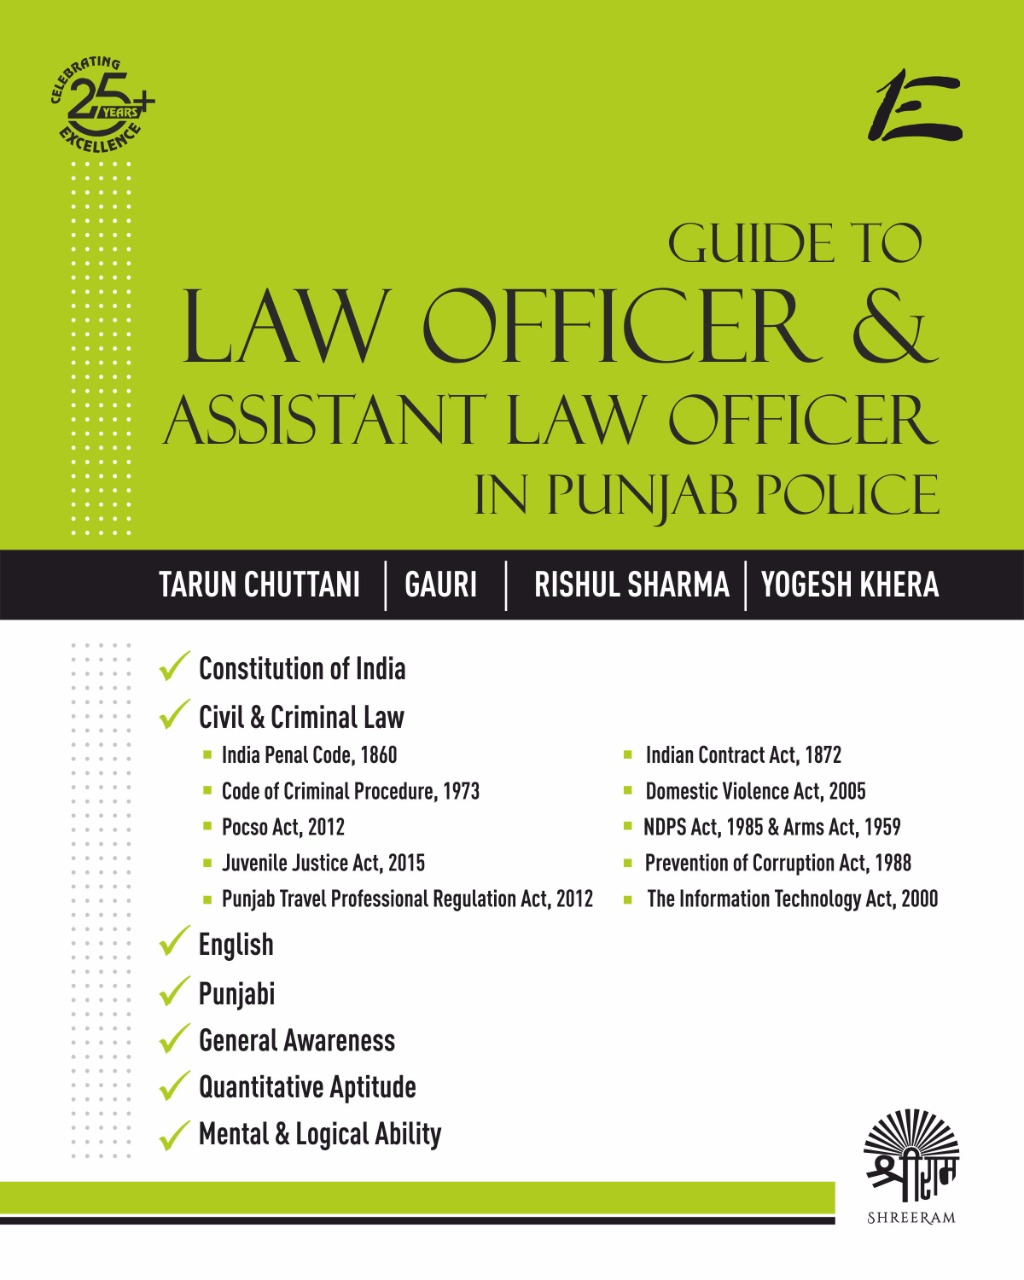 TARUN CHUTTANI  GUIDE TO LAW OFFICER & ASSISTANT LA OFFICER IN PUNJAB POLICE BY SHREERAM lAW HOUSE